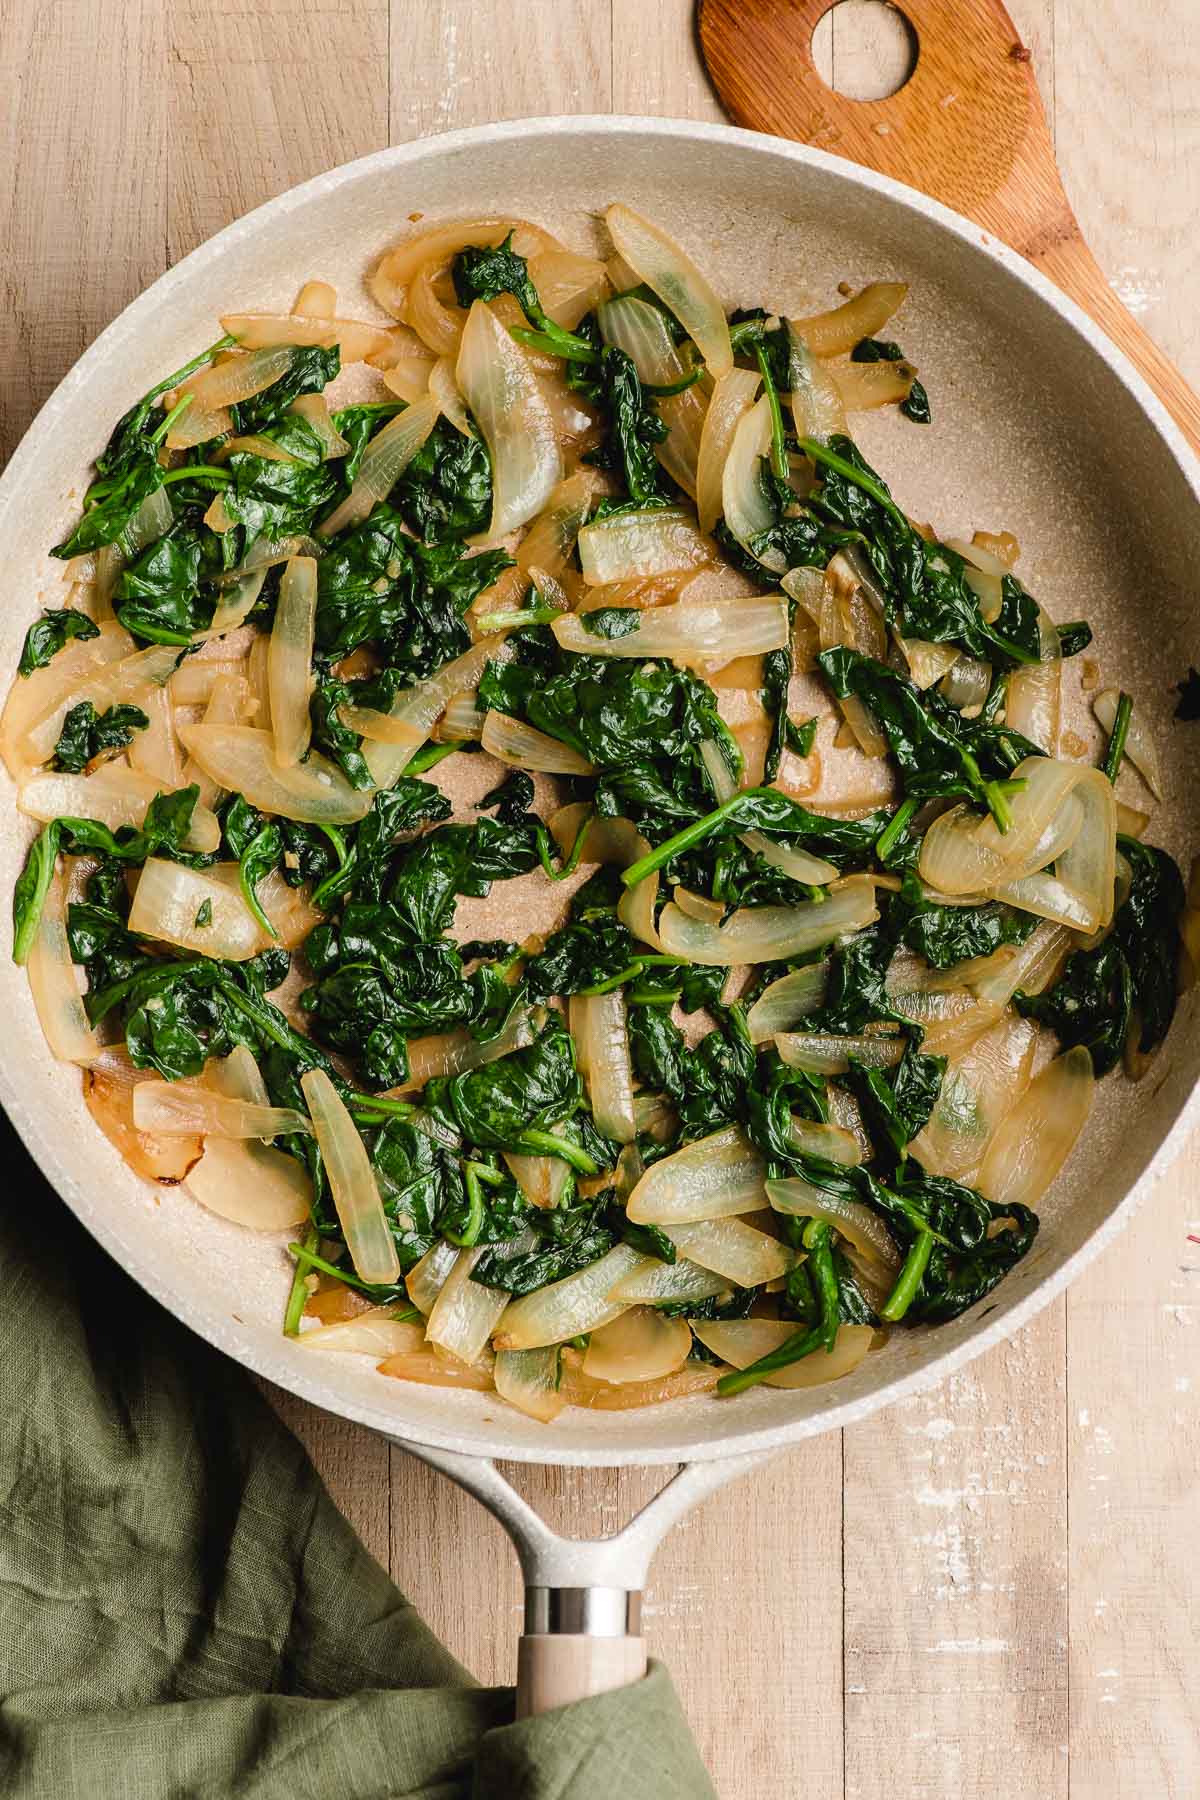 Skillet holding cooked spinach and browned onions.